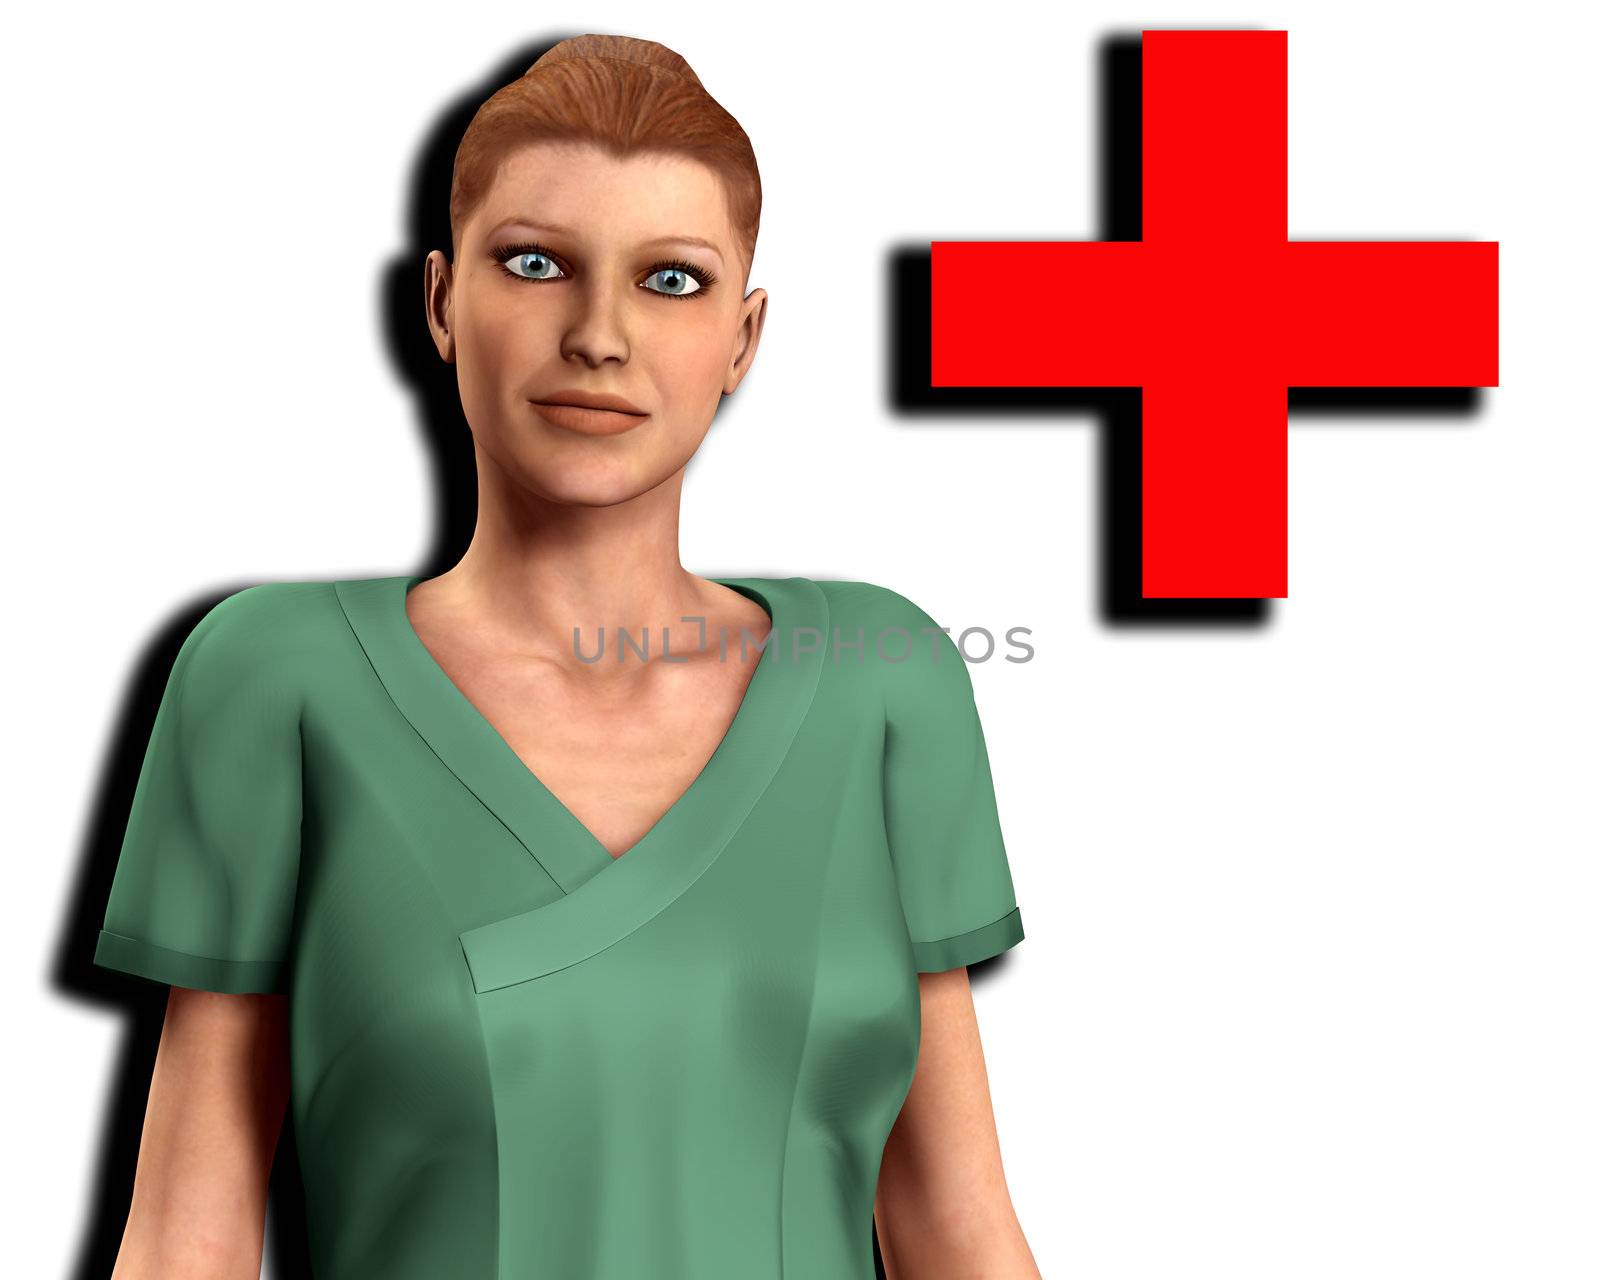 A image of a nurse in scrubs clothing.